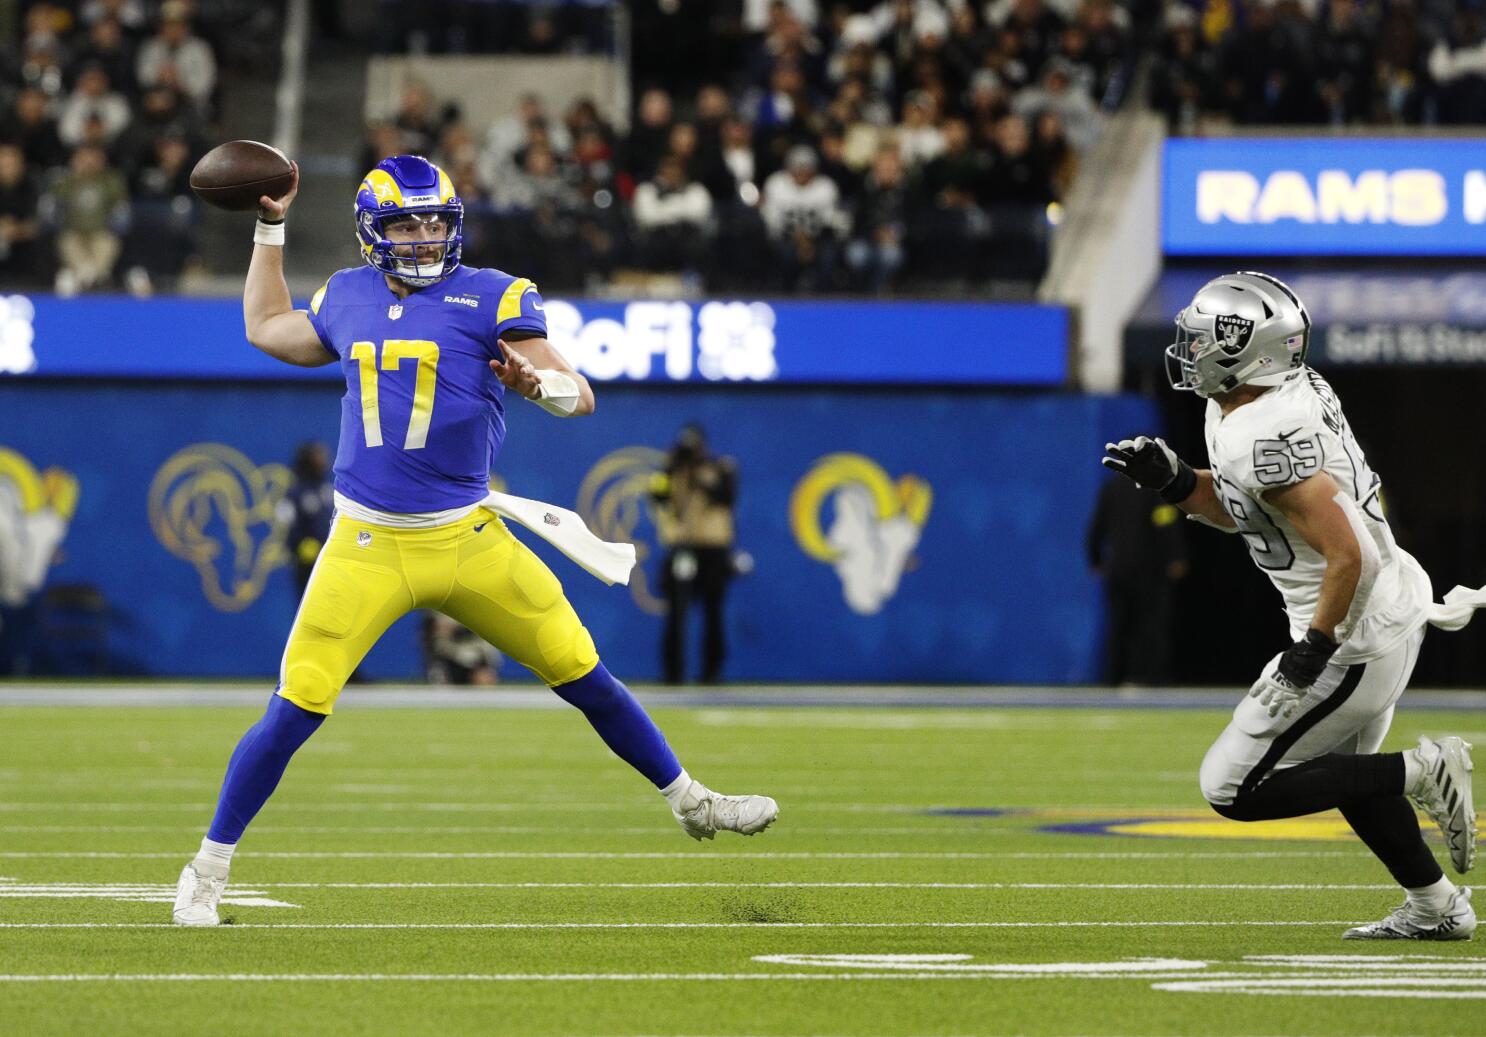 Baker Mayfield doesn't start for Rams, but he was in for the 2nd series